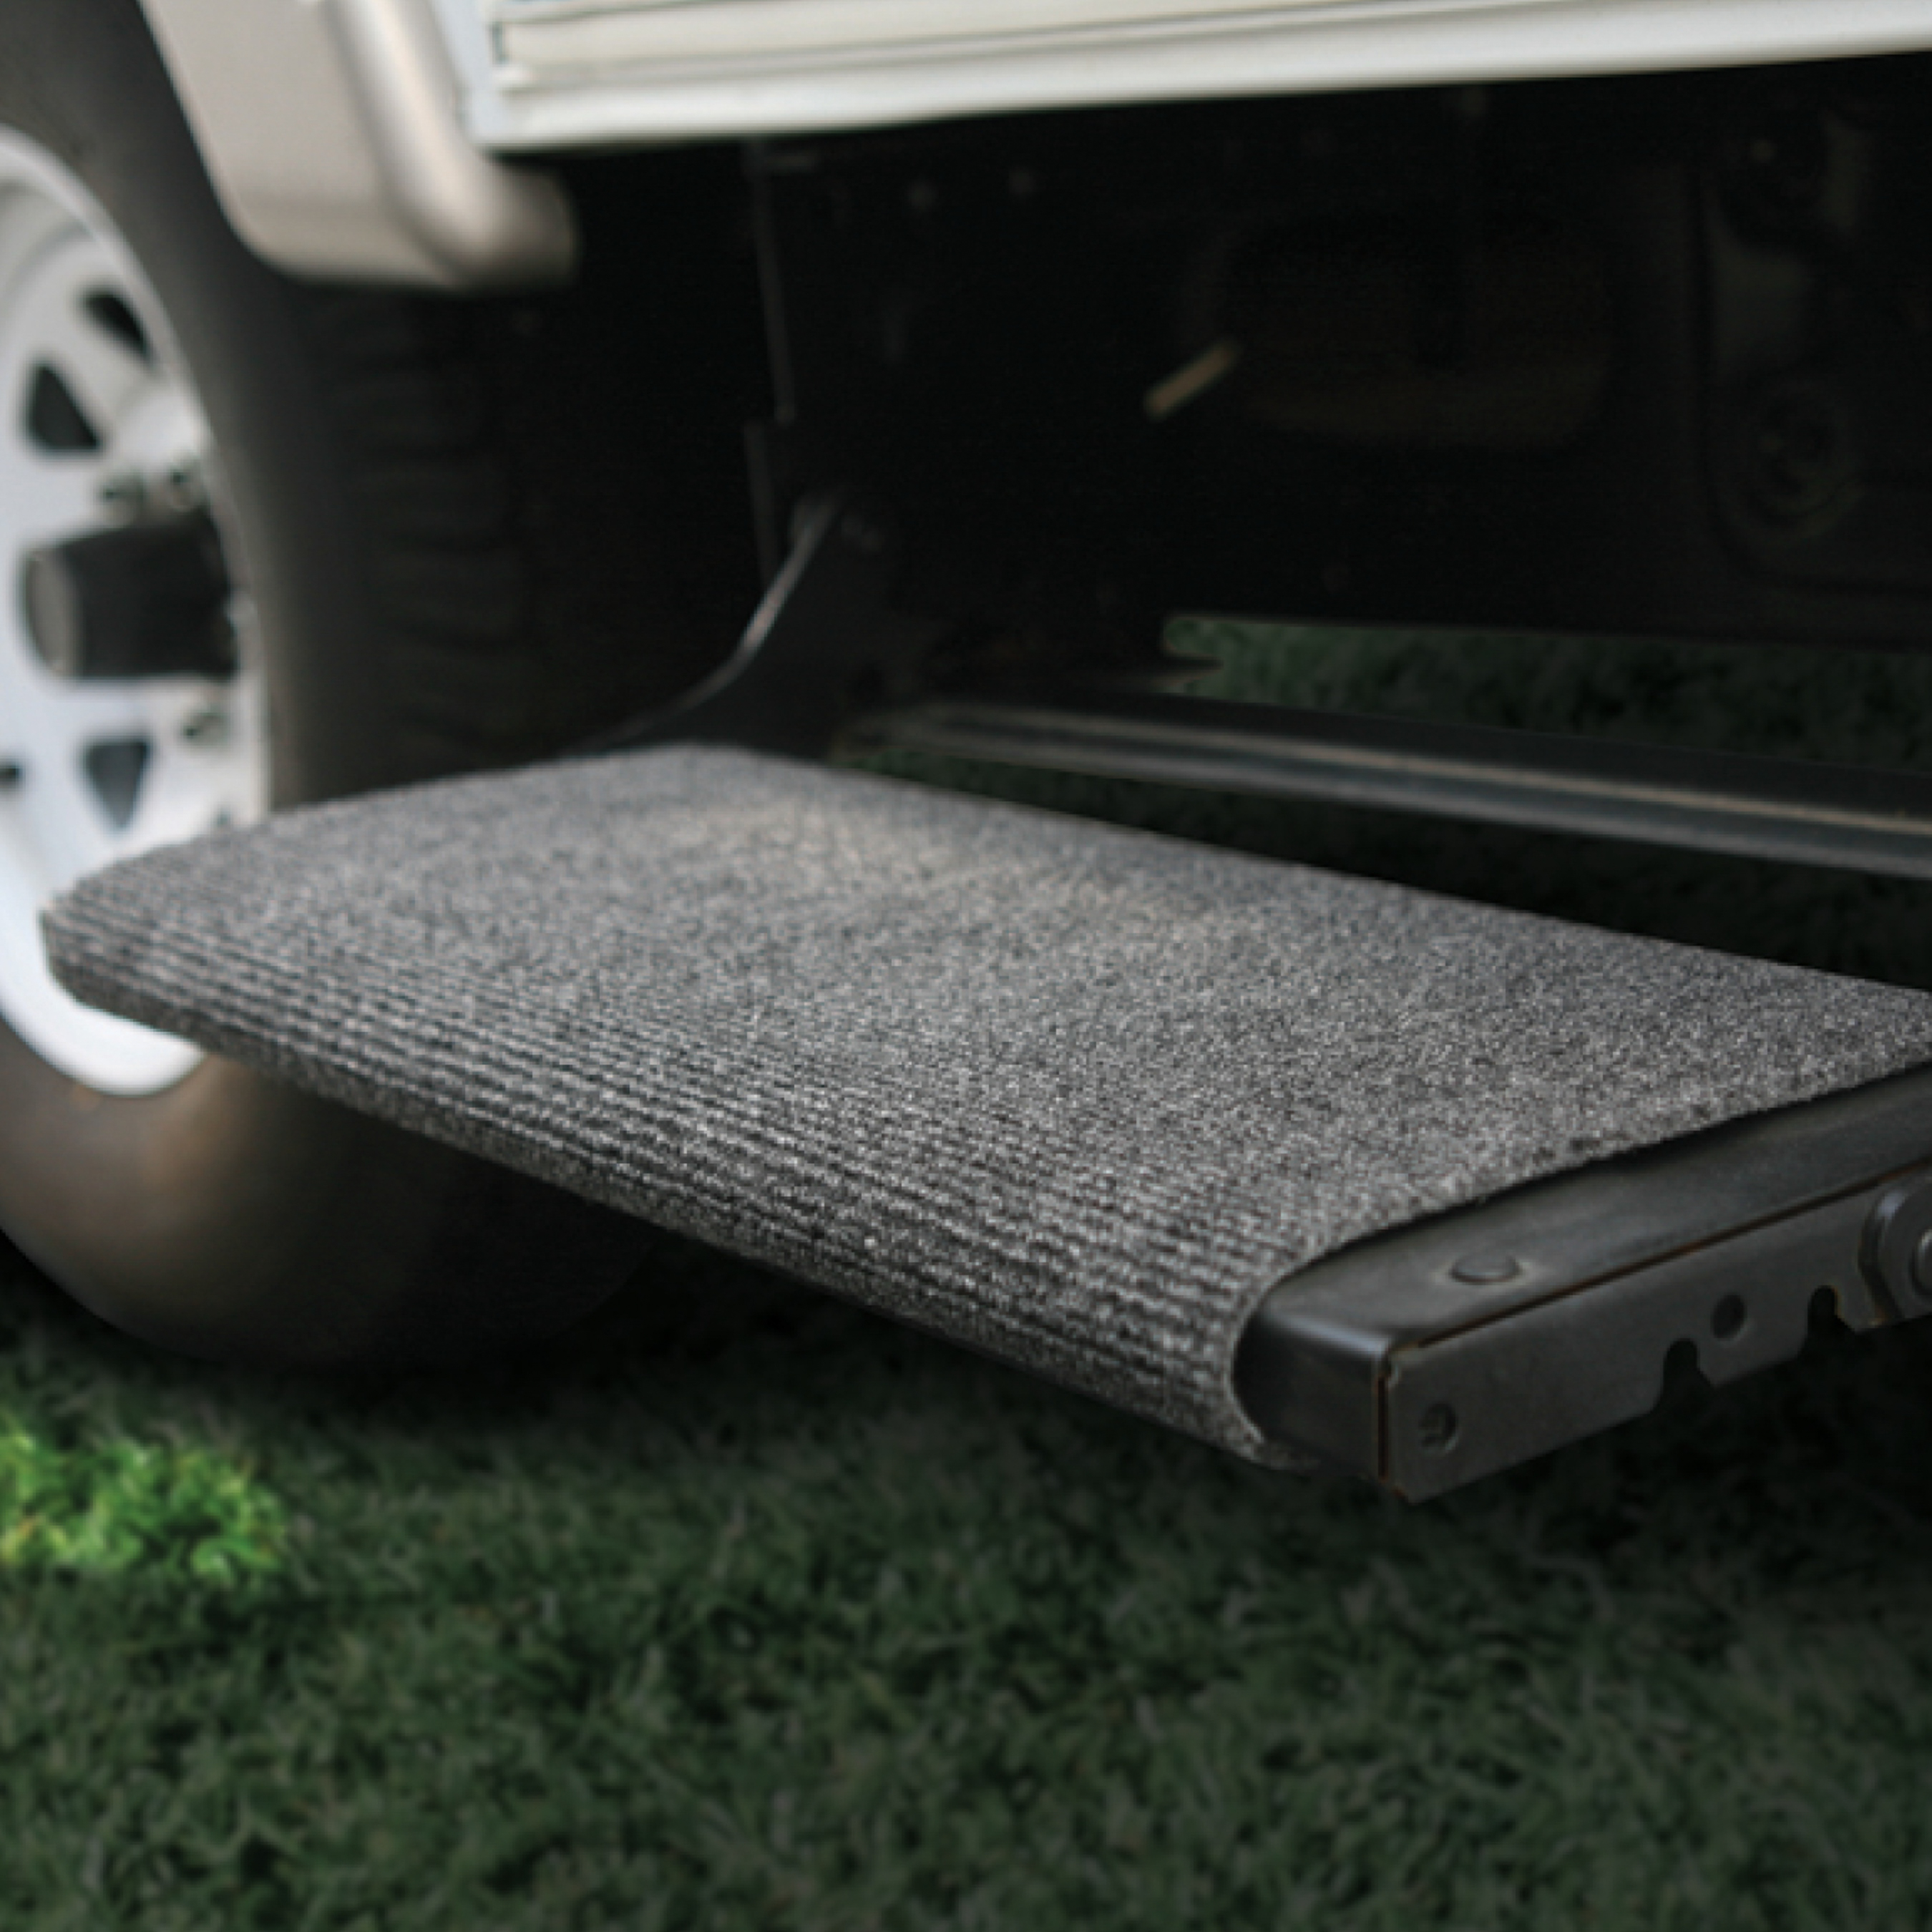 Camco Wrap around RV Step Rug - ﻿Weather-Resistant Materials, Gray (42925) - image 1 of 7